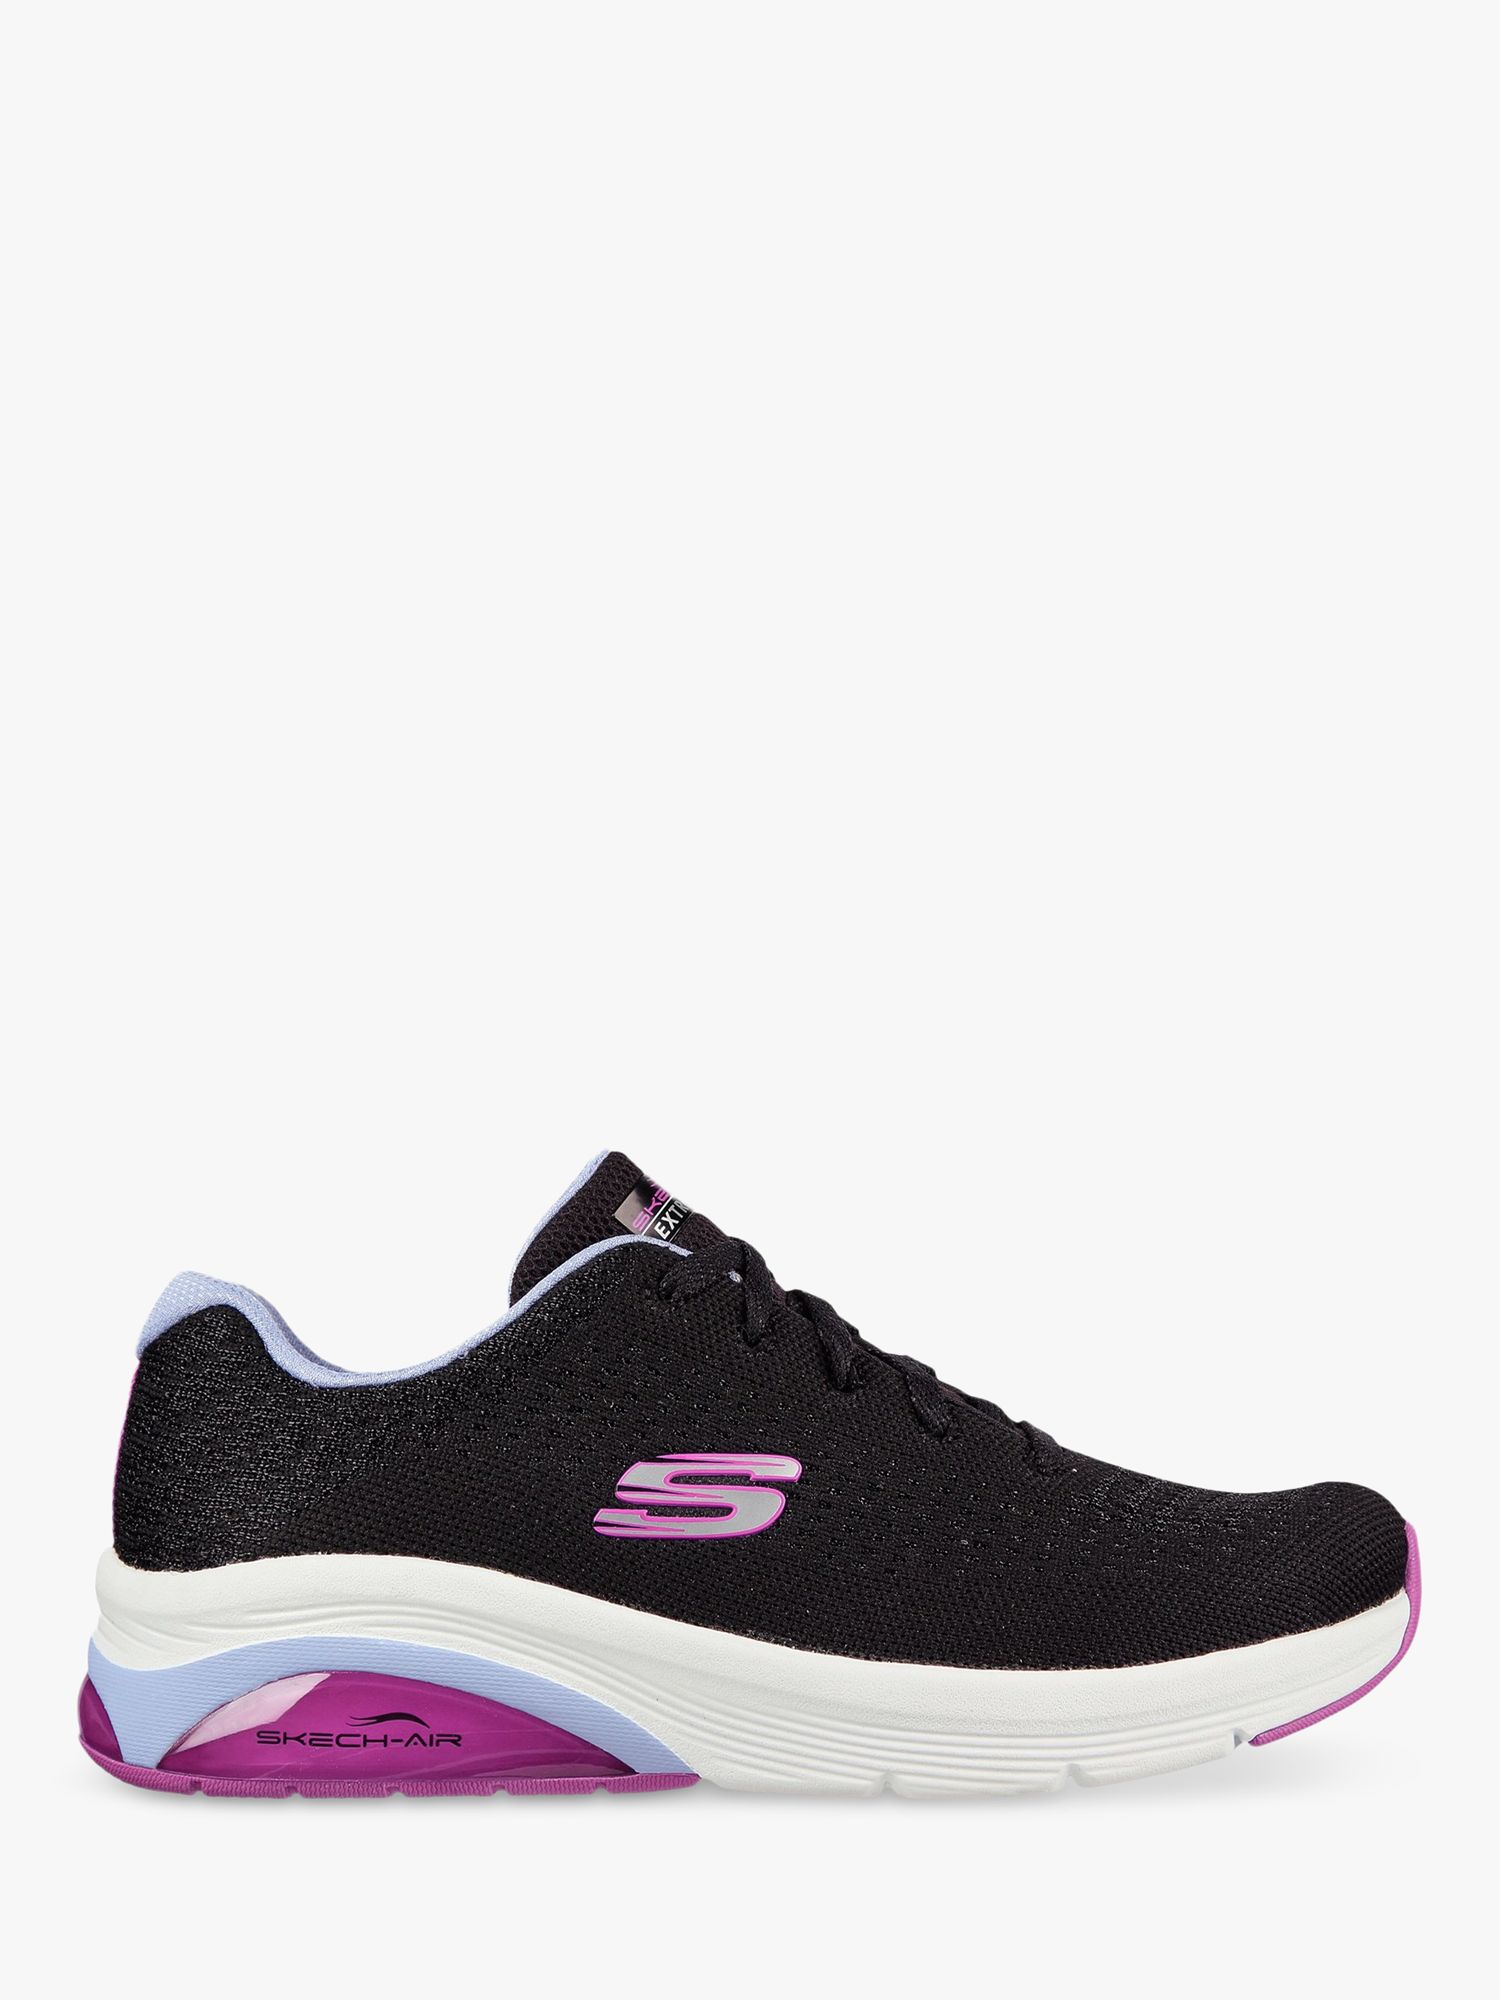 Skechers Skech-Air Extreme 2.0 Classic Vibe Sports Trainers, Black at ...